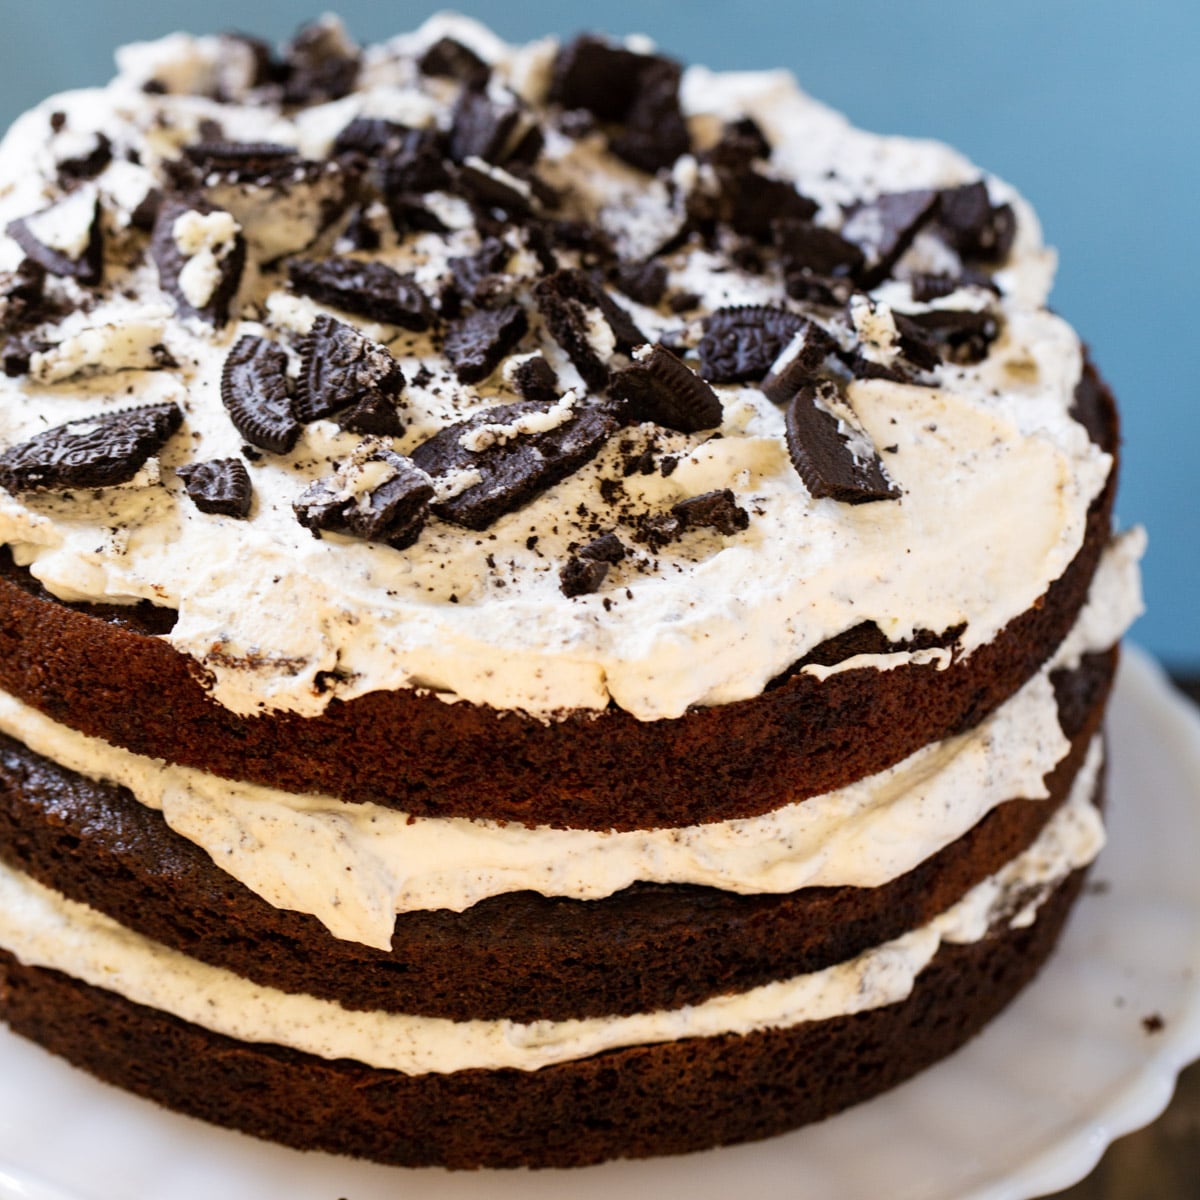 Mississippi Mudslide Cake topped with crushed oreos on a cake stand.